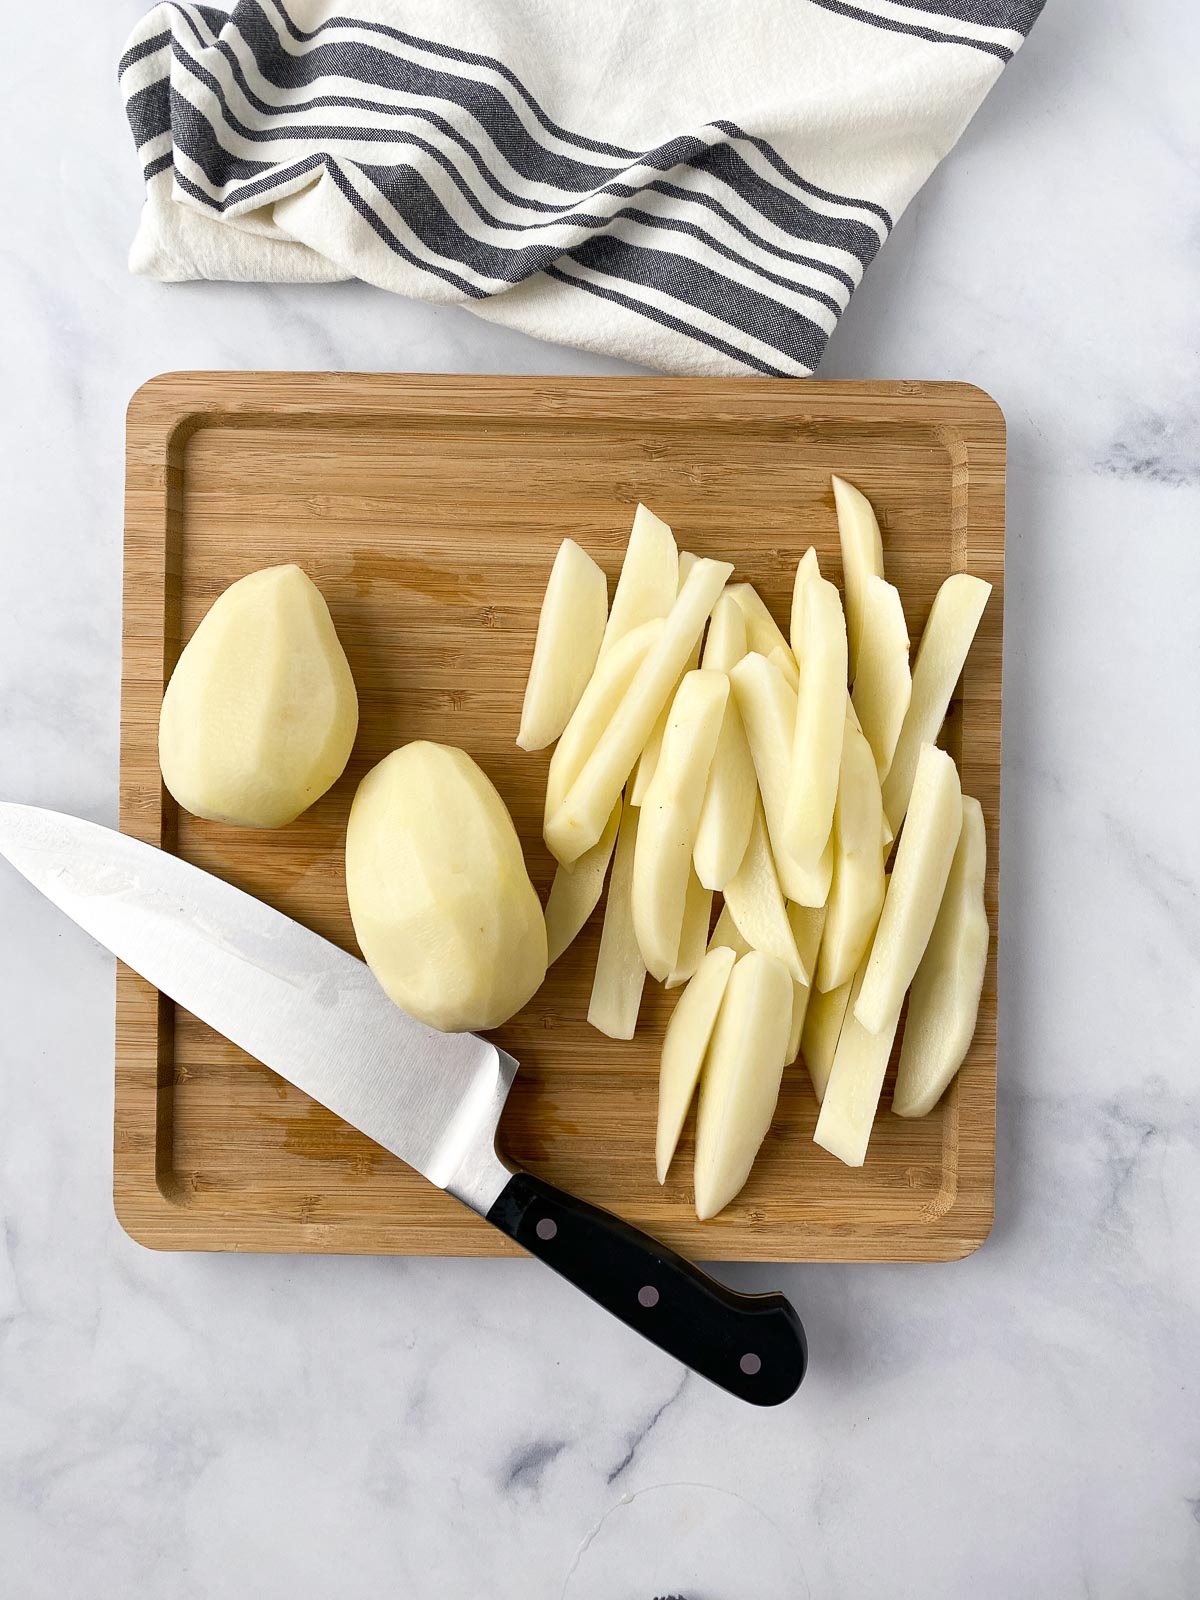 Peeled and fry cut potatoes on a cutting board.